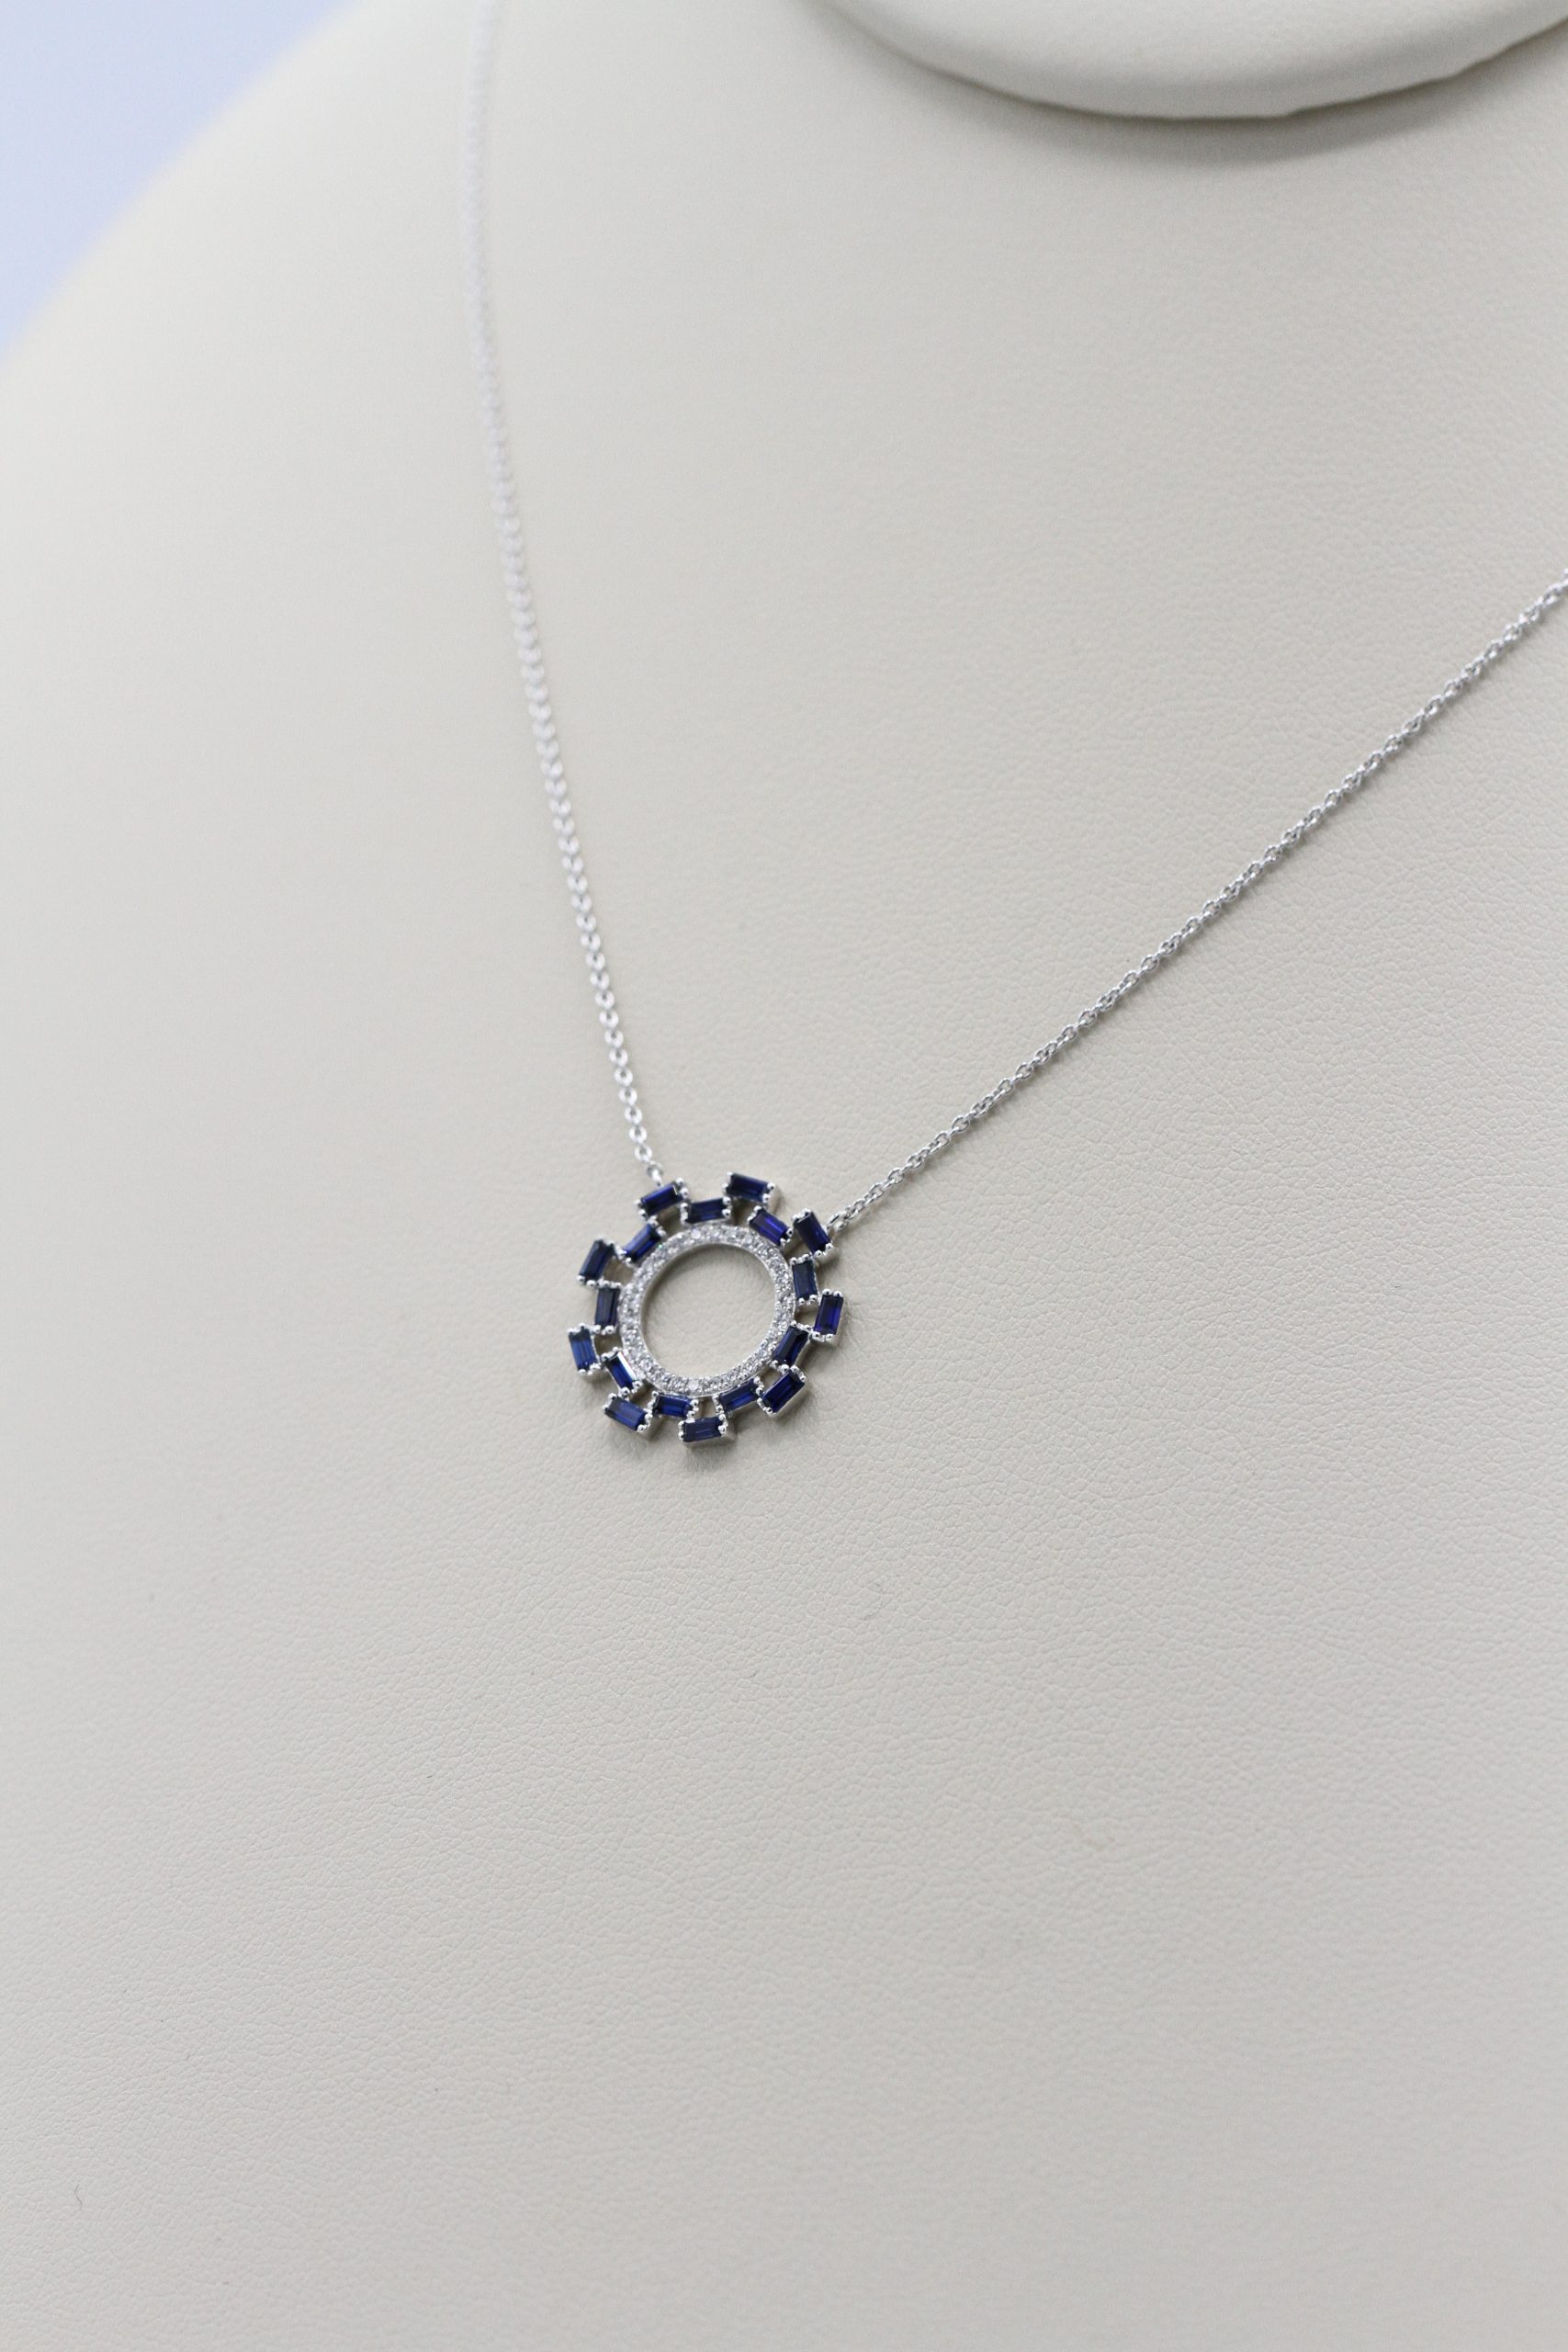 A necklace with a circle-shaped centerpiece.